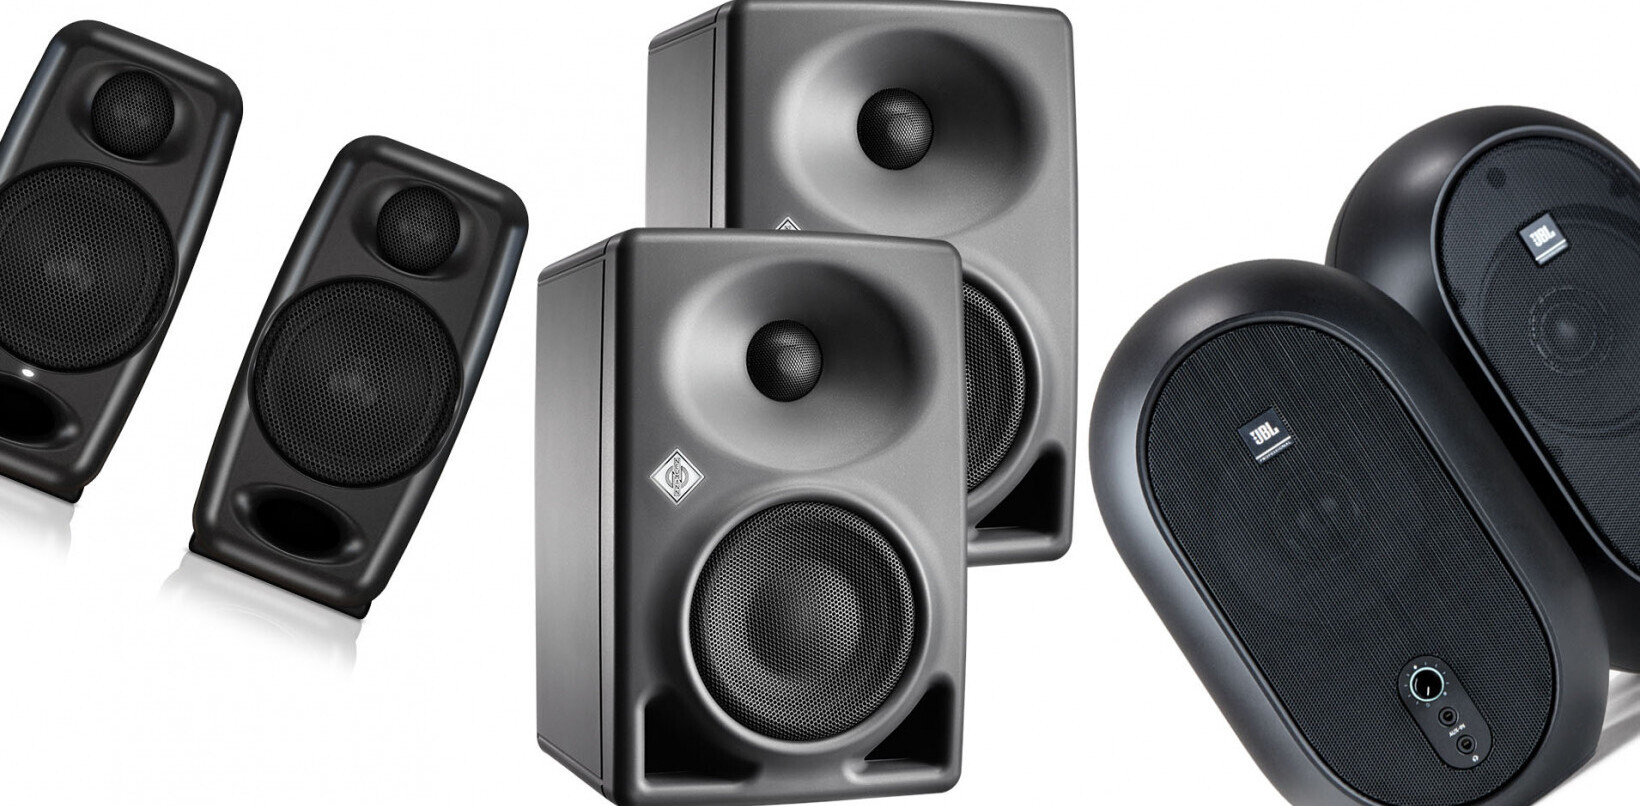 These 3 studio monitors are great speakers for a small desk